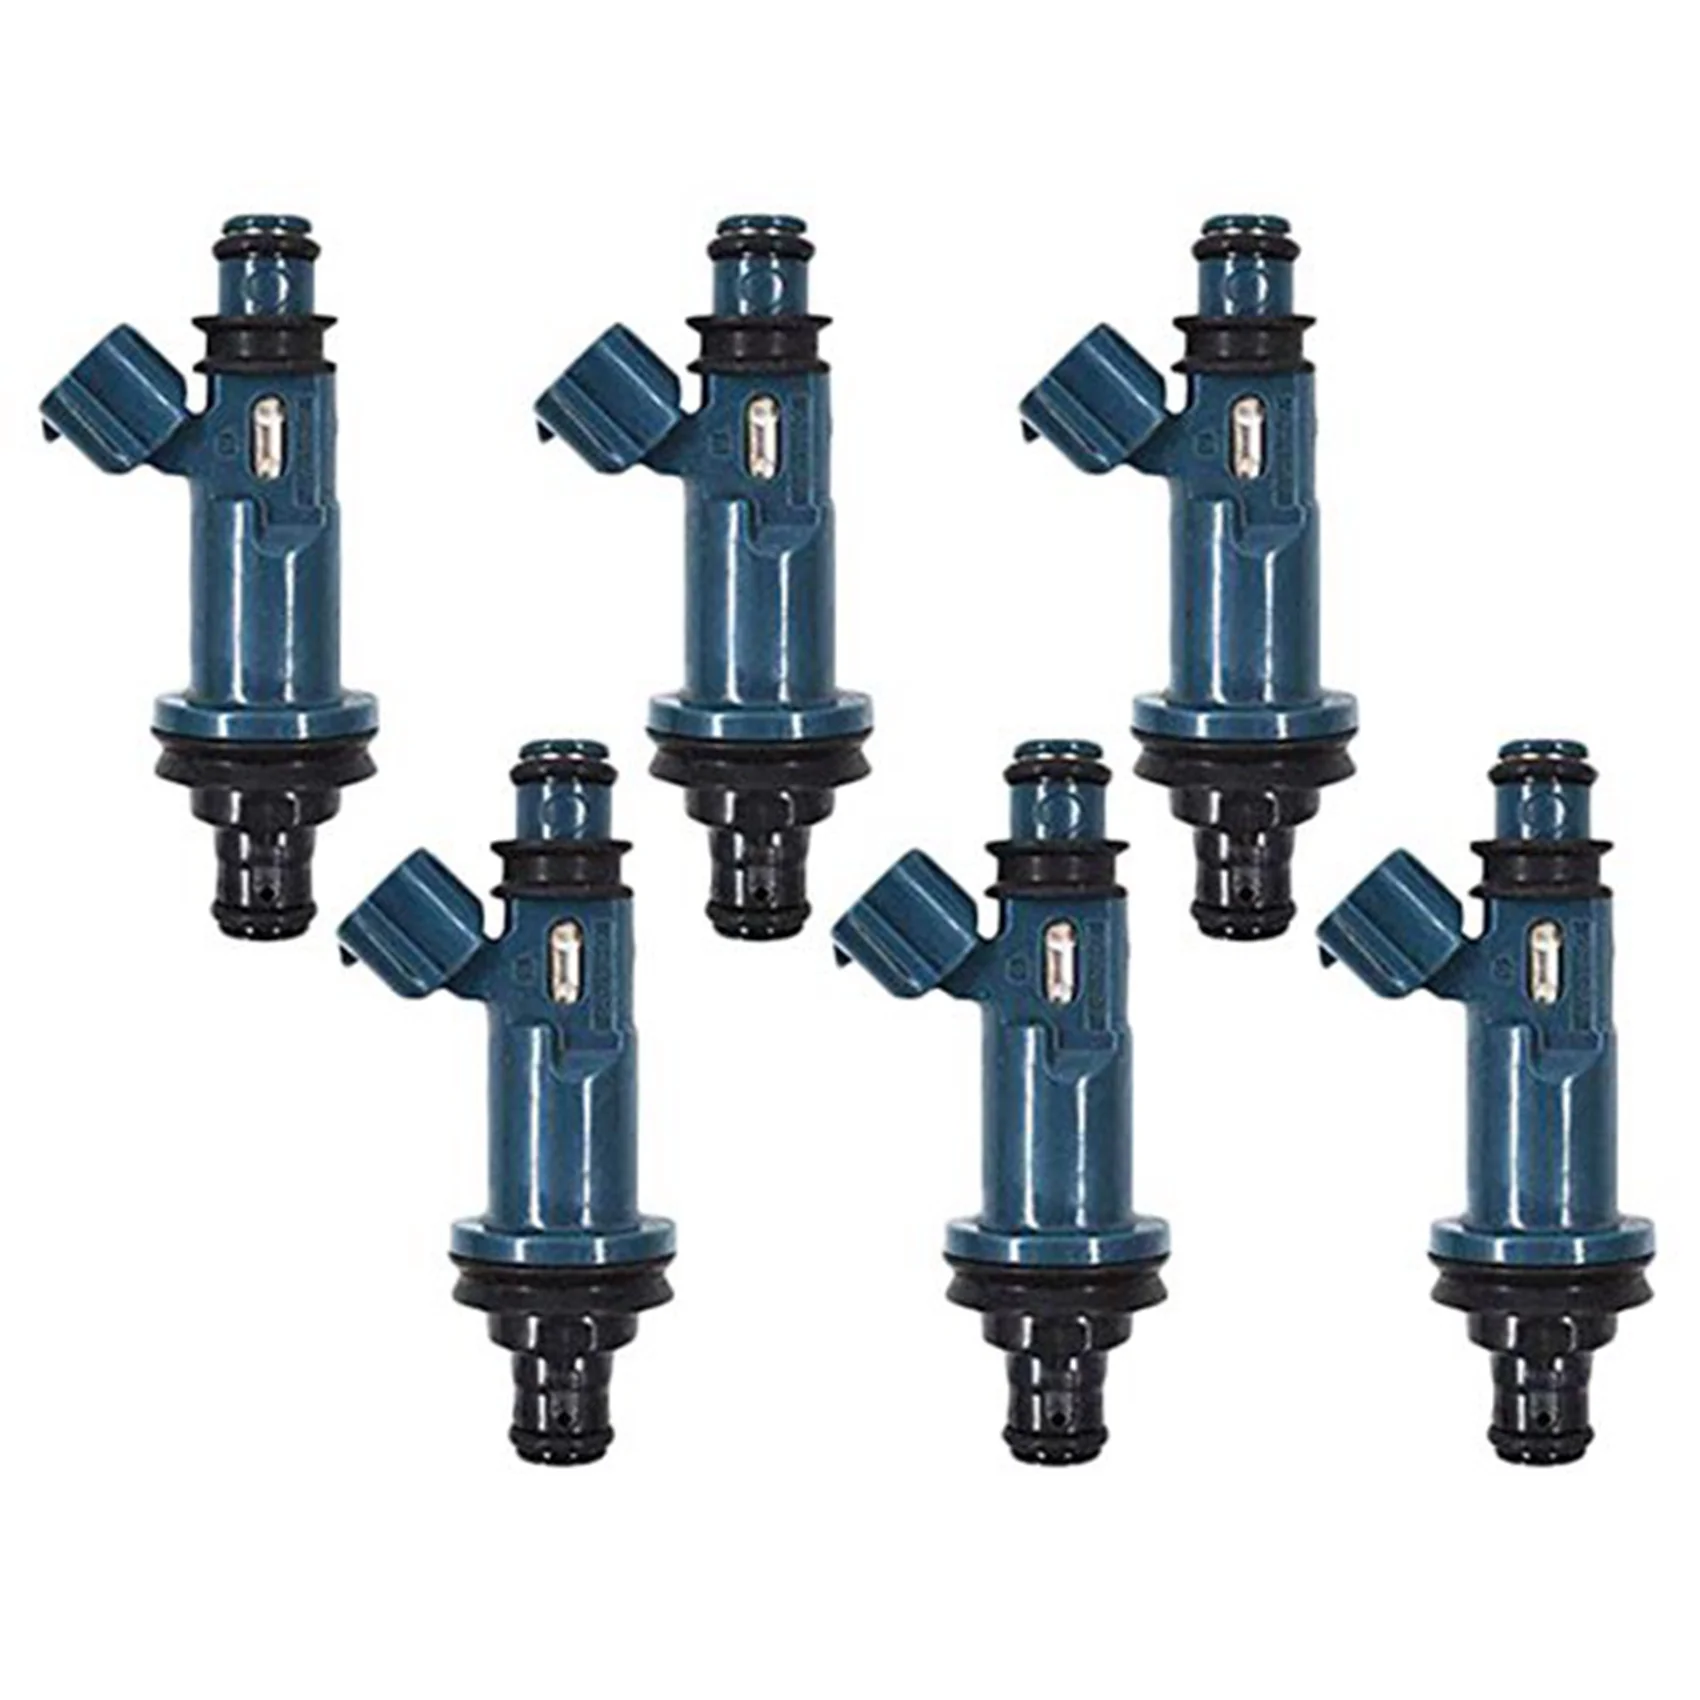 

6PCS Fuel Injectors 23250-20020 for Toyota Sienna Avalon 3.0L for Lexus RX300 Replacement 2325020020